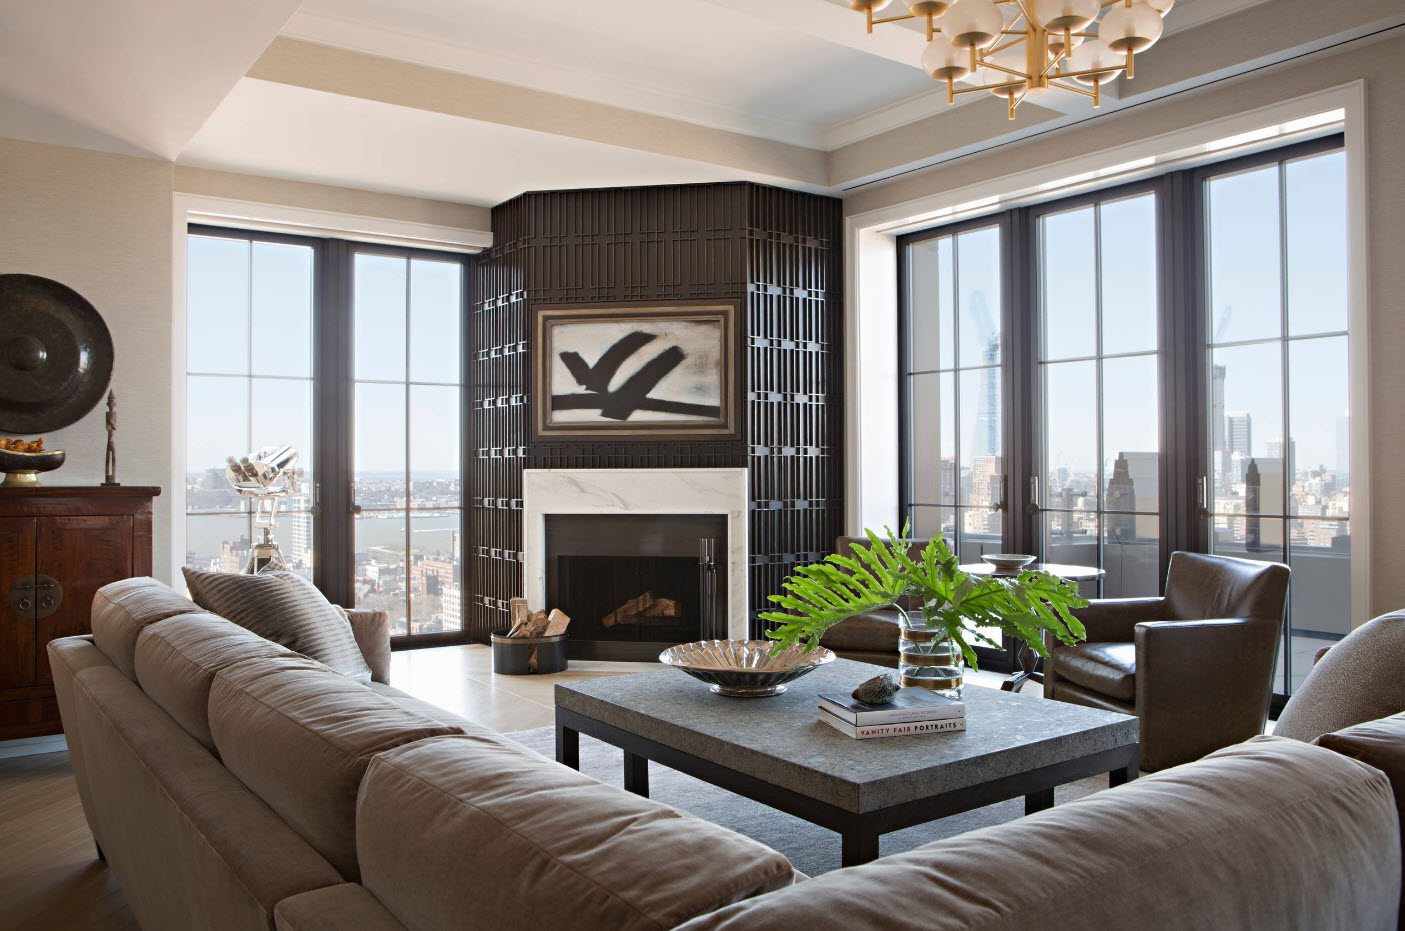 An example of applying a beautiful design of a living room with a fireplace